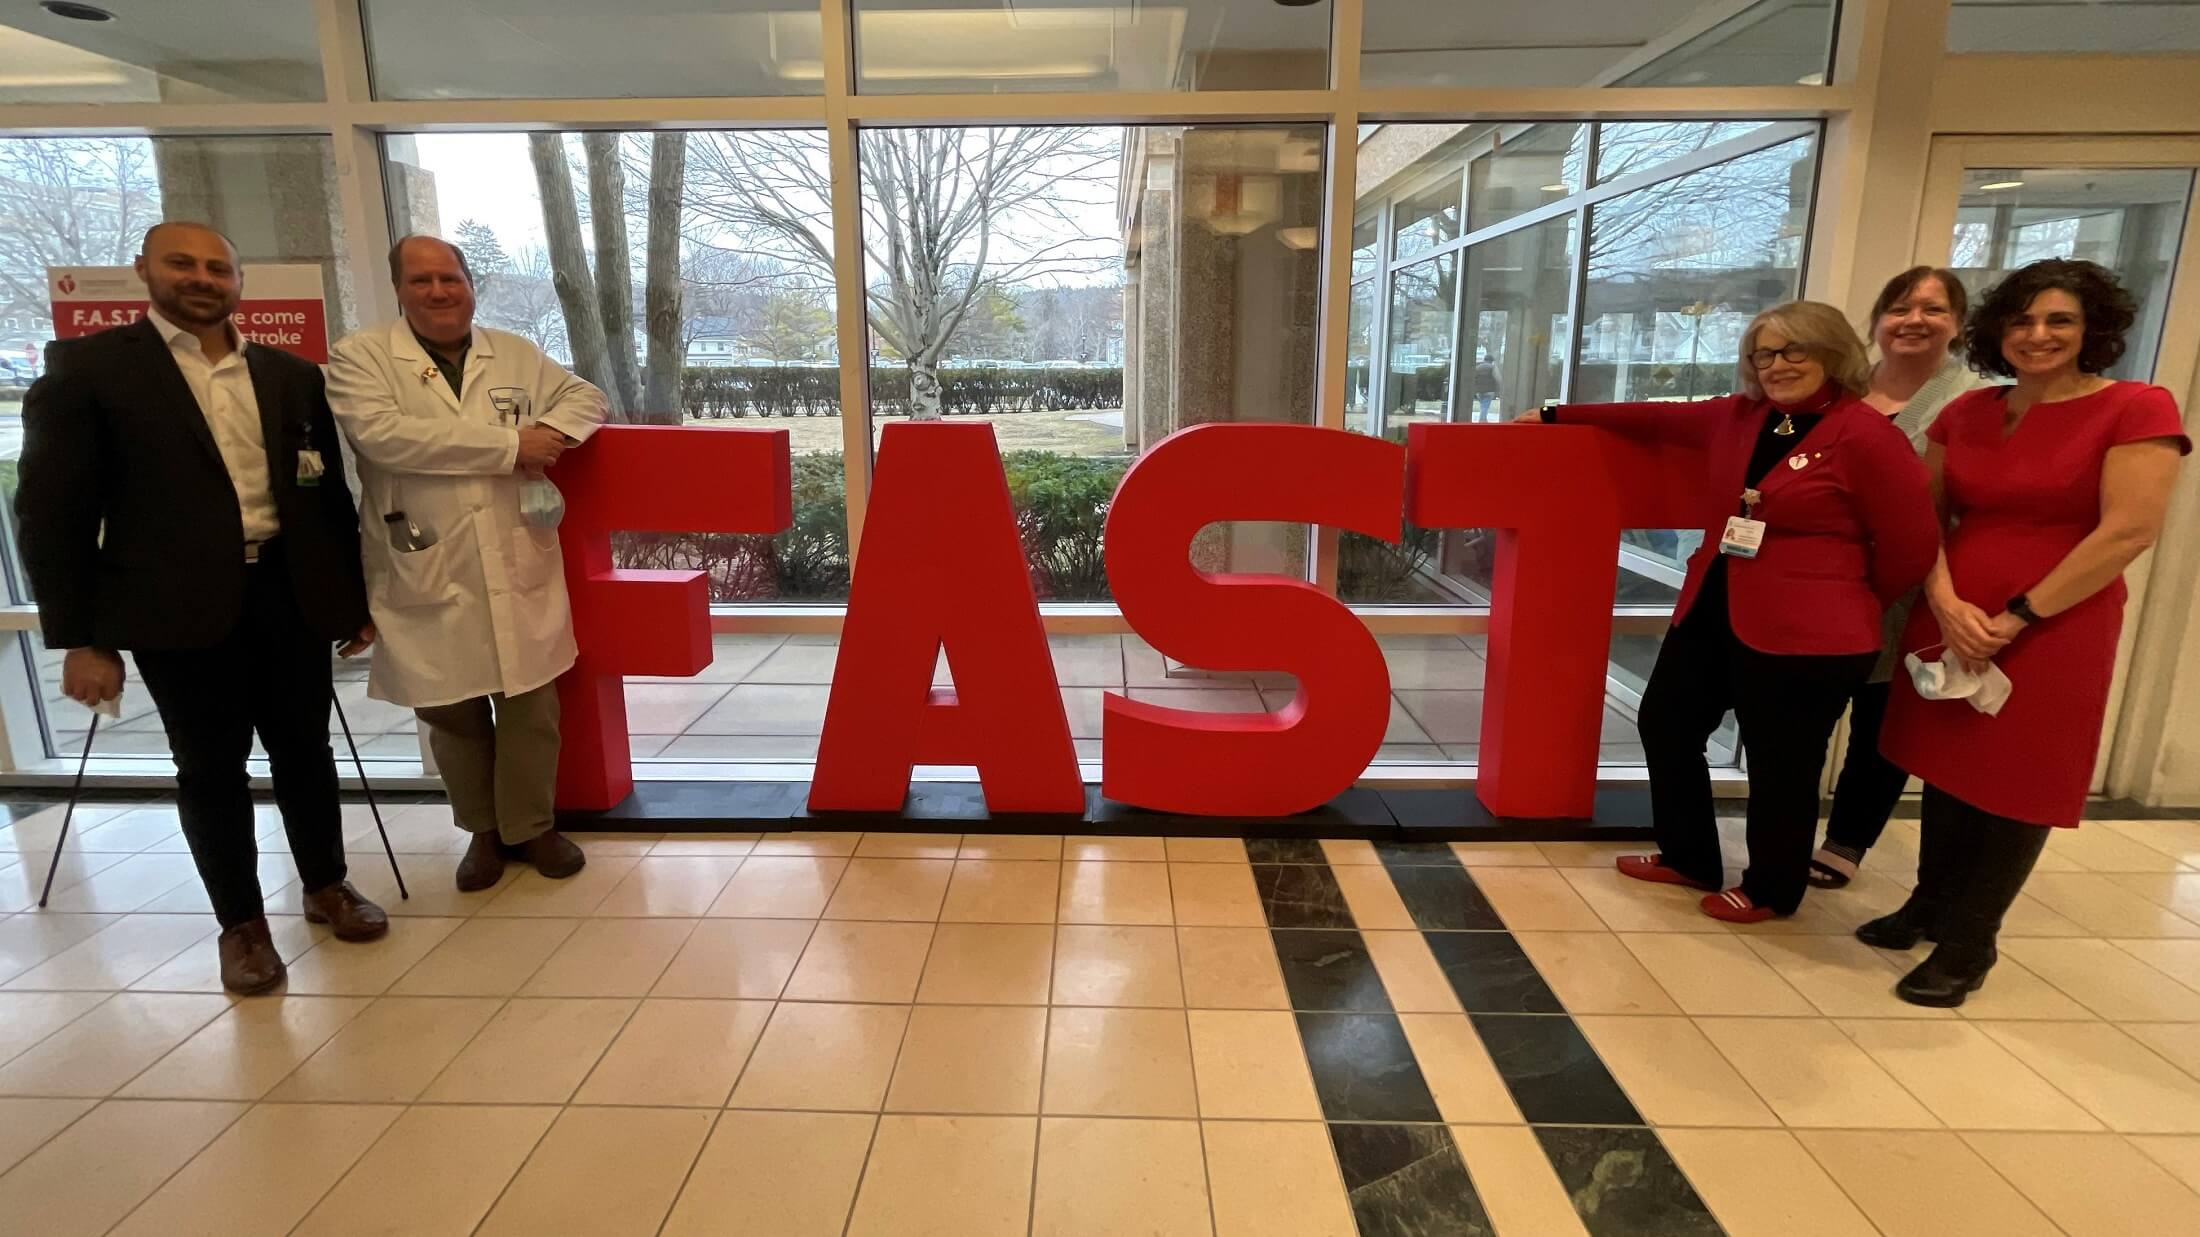 Bassett leaders with Christine Kisiel from American Heart Association of the Greater Utica Area standing in front of life-sized FAST letters